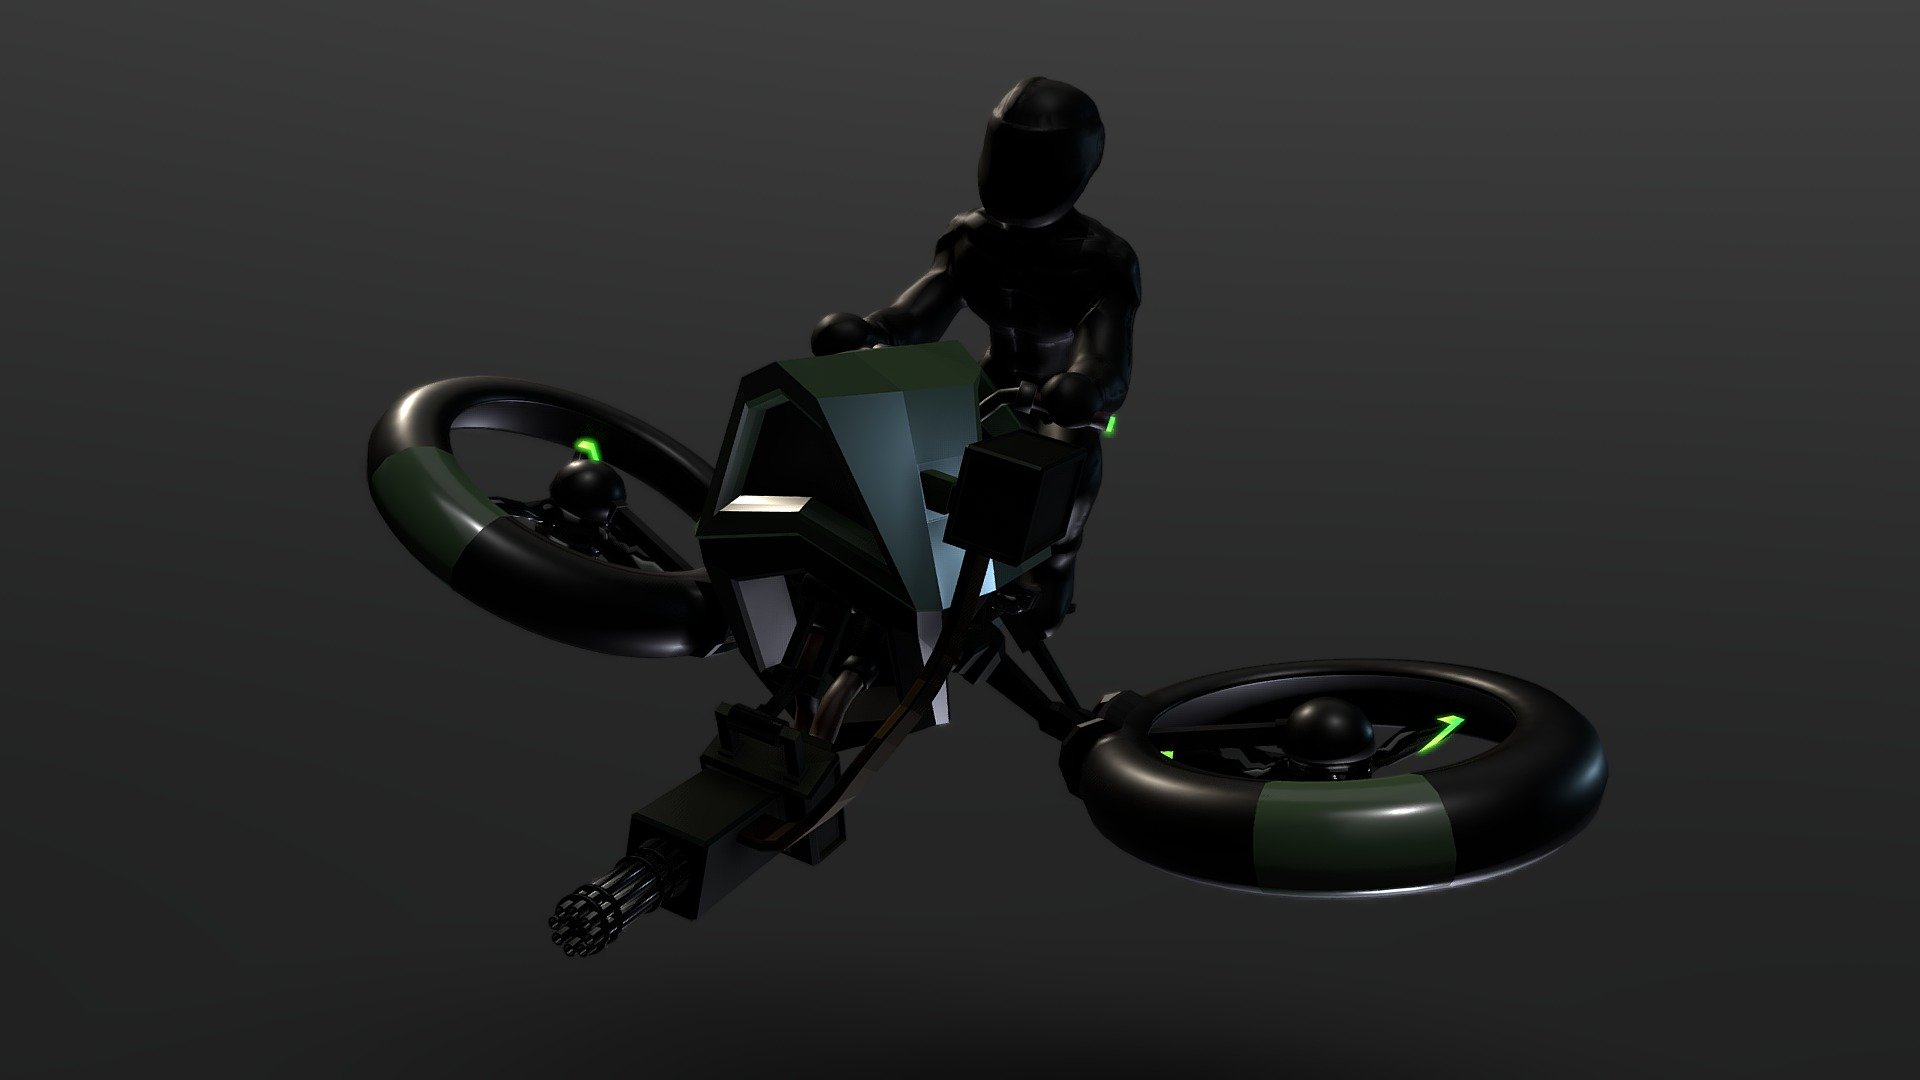 A daily doodle.. made entirely in Blender.
The chasis, gun etc were box modelled. The rider was sculpted 3d model